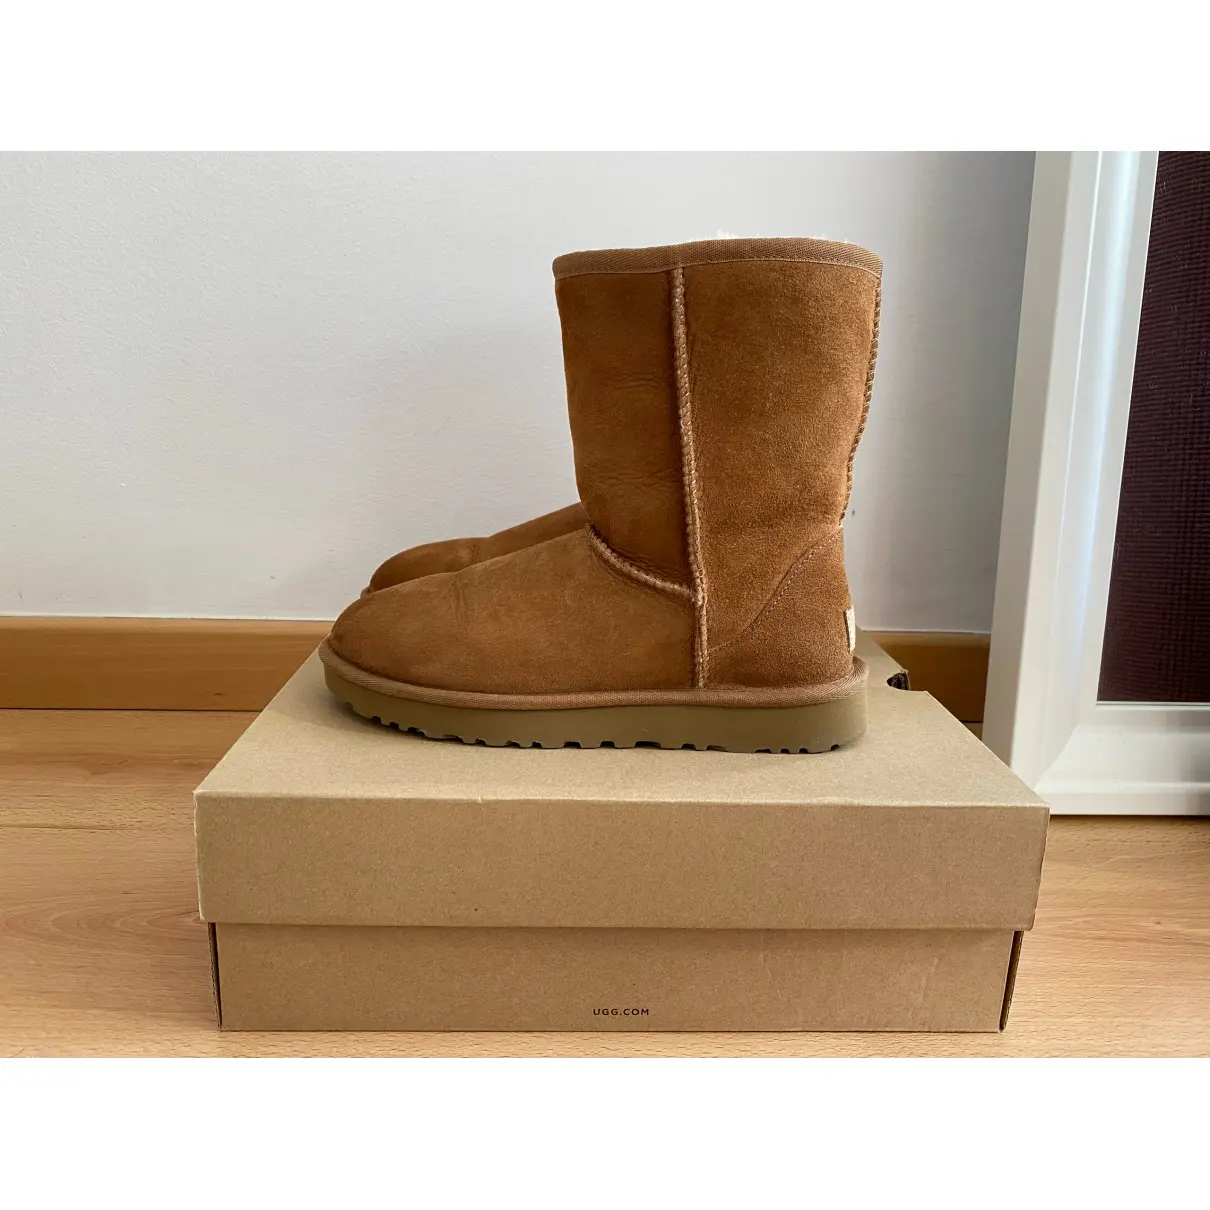 Buy Ugg Shearling ankle boots online